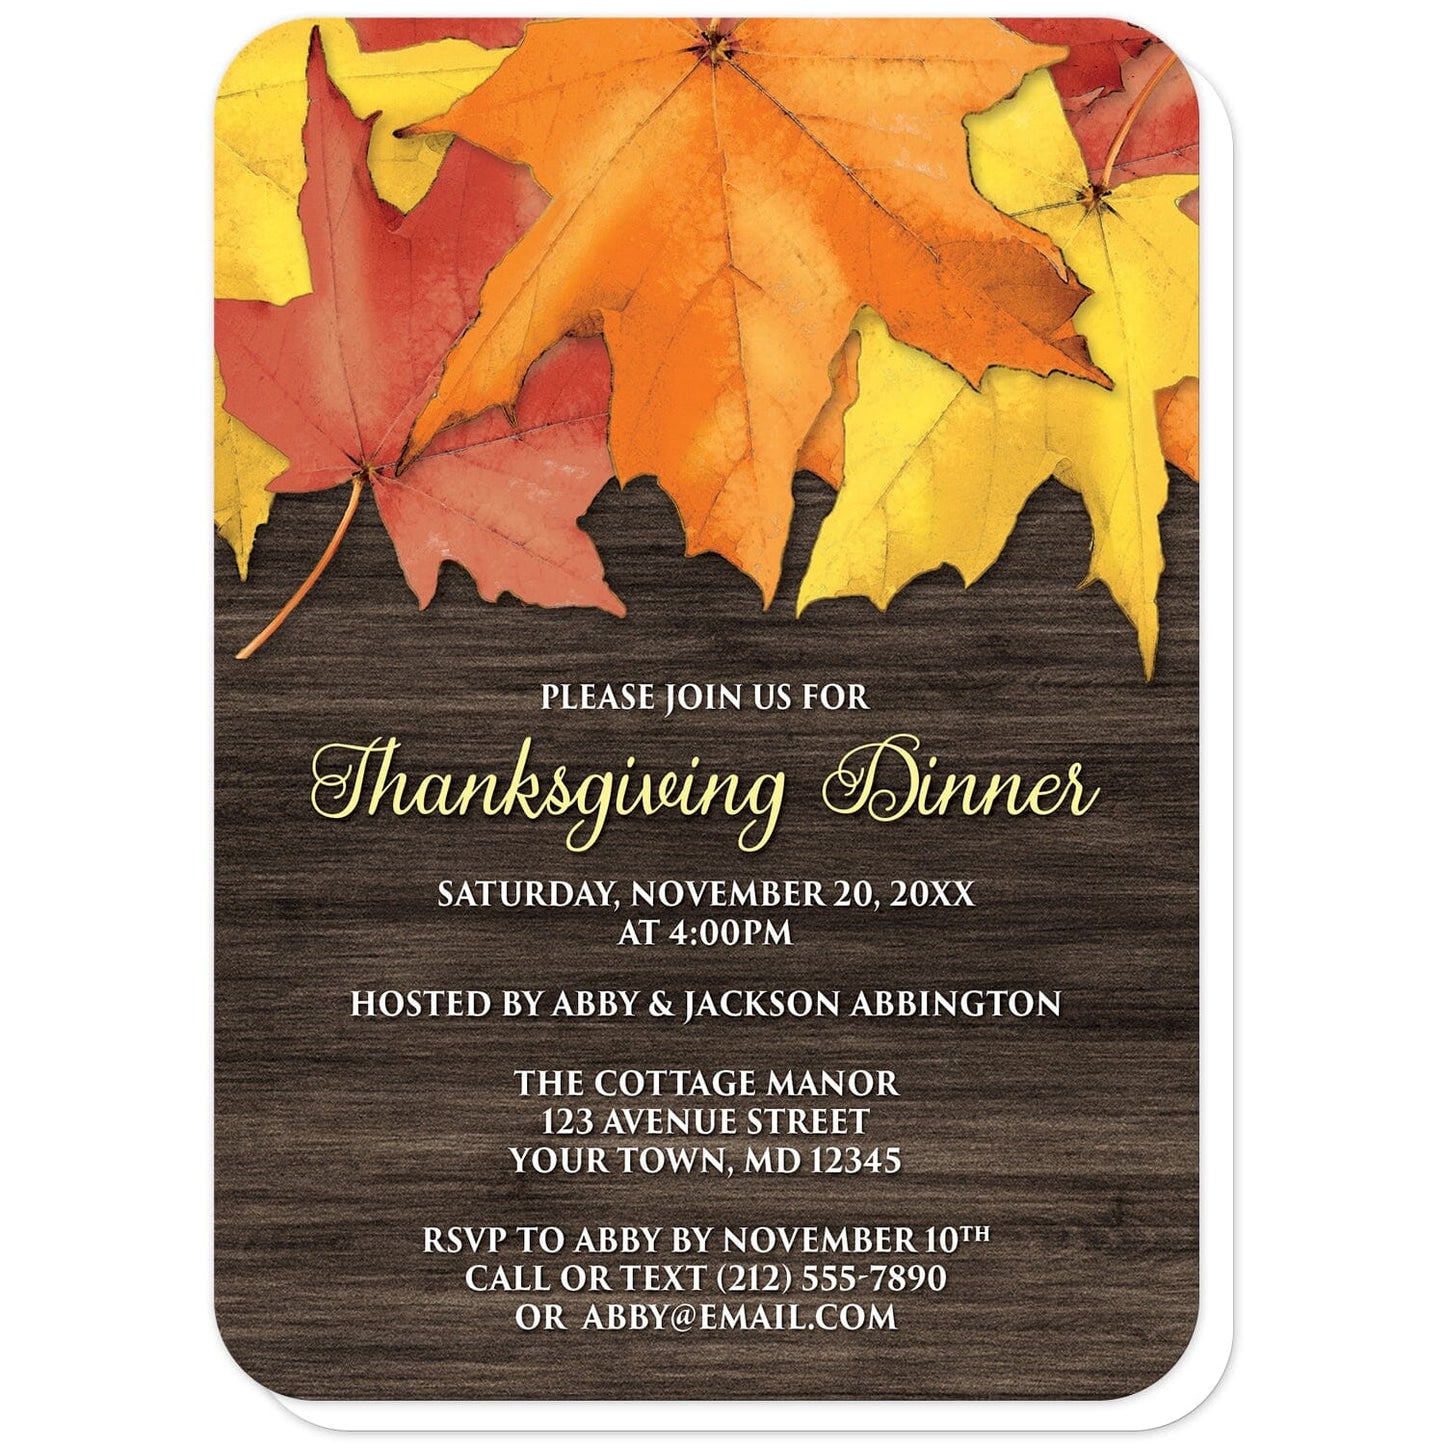 Rustic Autumn Leaves Wood Thanksgiving Invitations (with rounded corners) at Artistically Invited. Southern-inspired rustic autumn leaves wood Thanksgiving invitations with an arrangement of rustic yellow, orange, and red fall leaves along the top over a dark brown wood pattern. Your personalized Thanksgiving dinner details are custom printed in yellow and white over the rustic wood background. 